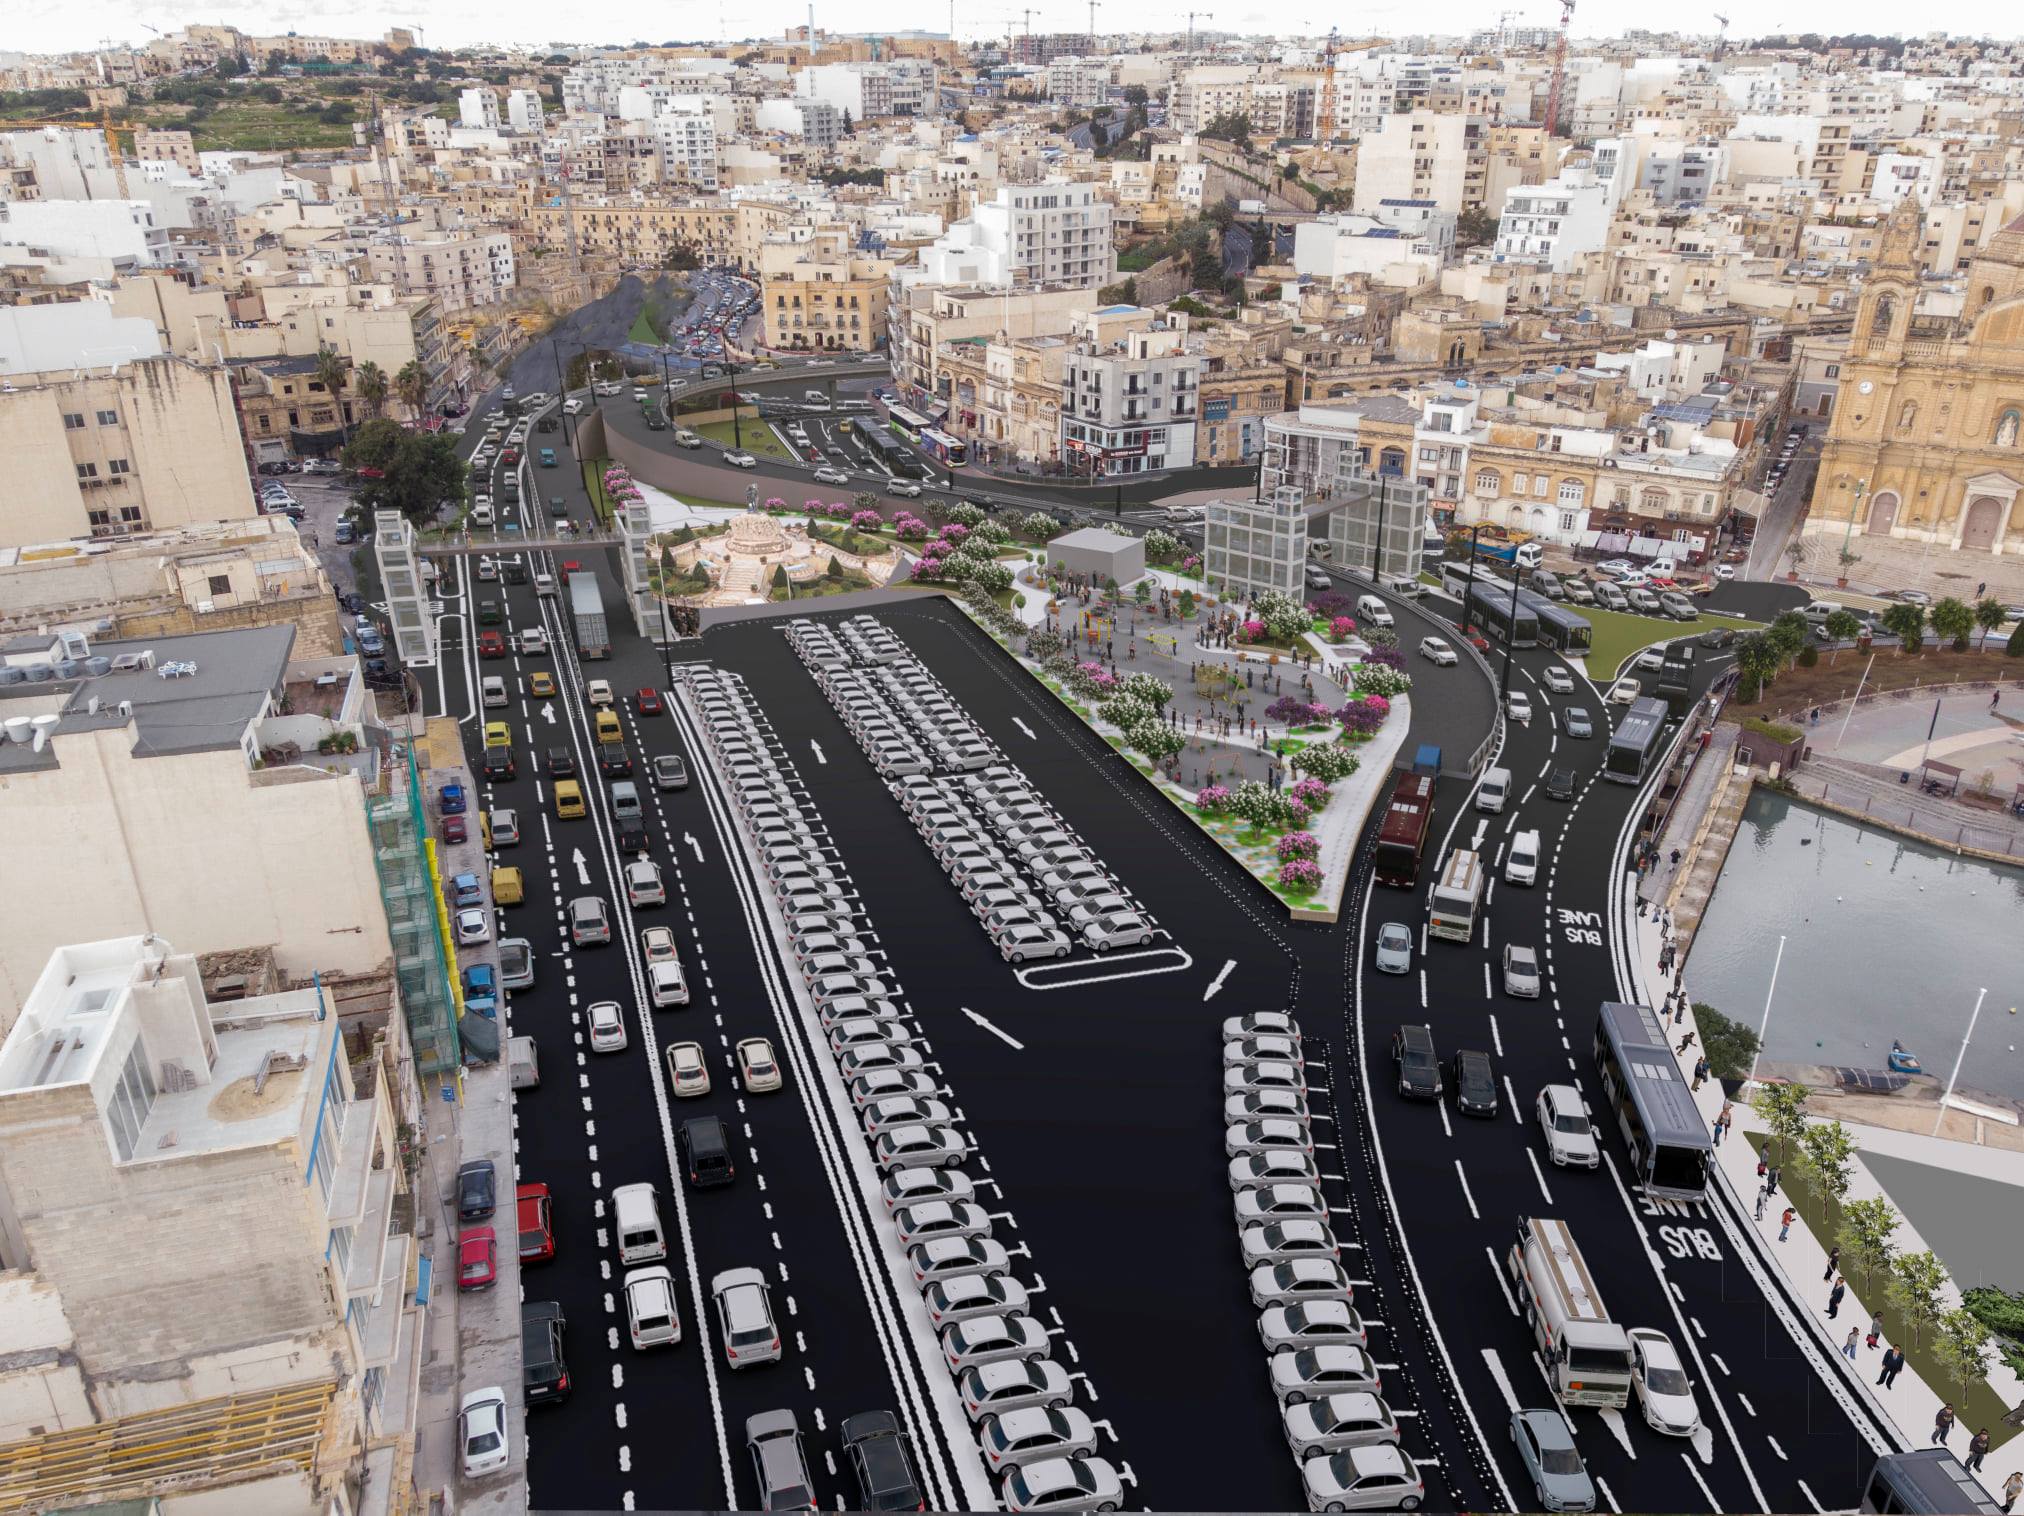 Msida Creek Project should go back to the drawing board